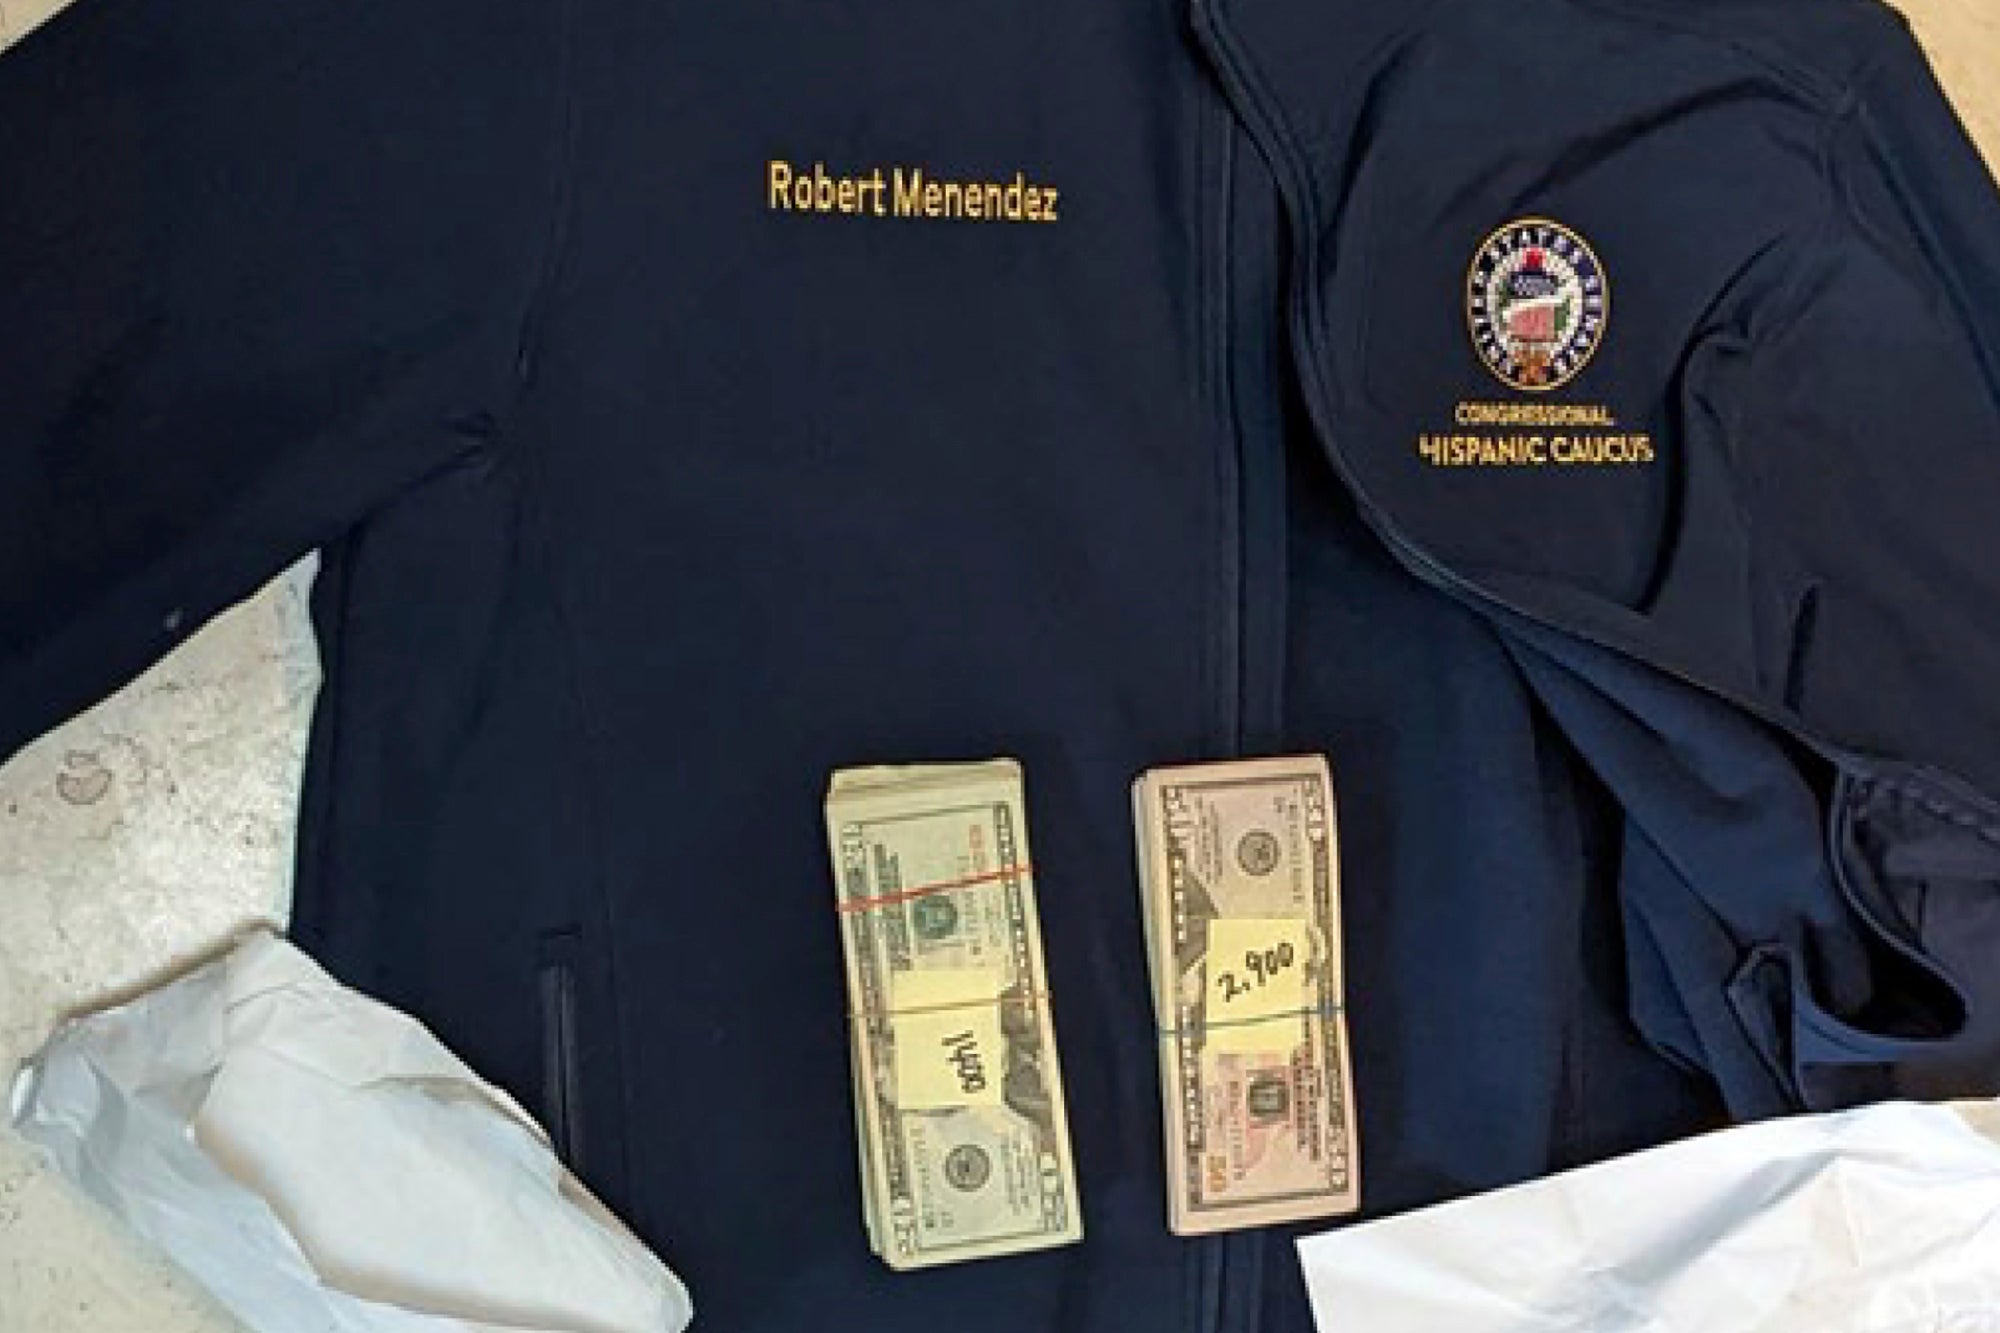 A jacket bearing Senator Menendez's name, along with cash found inside the jacket during a search by federal agents